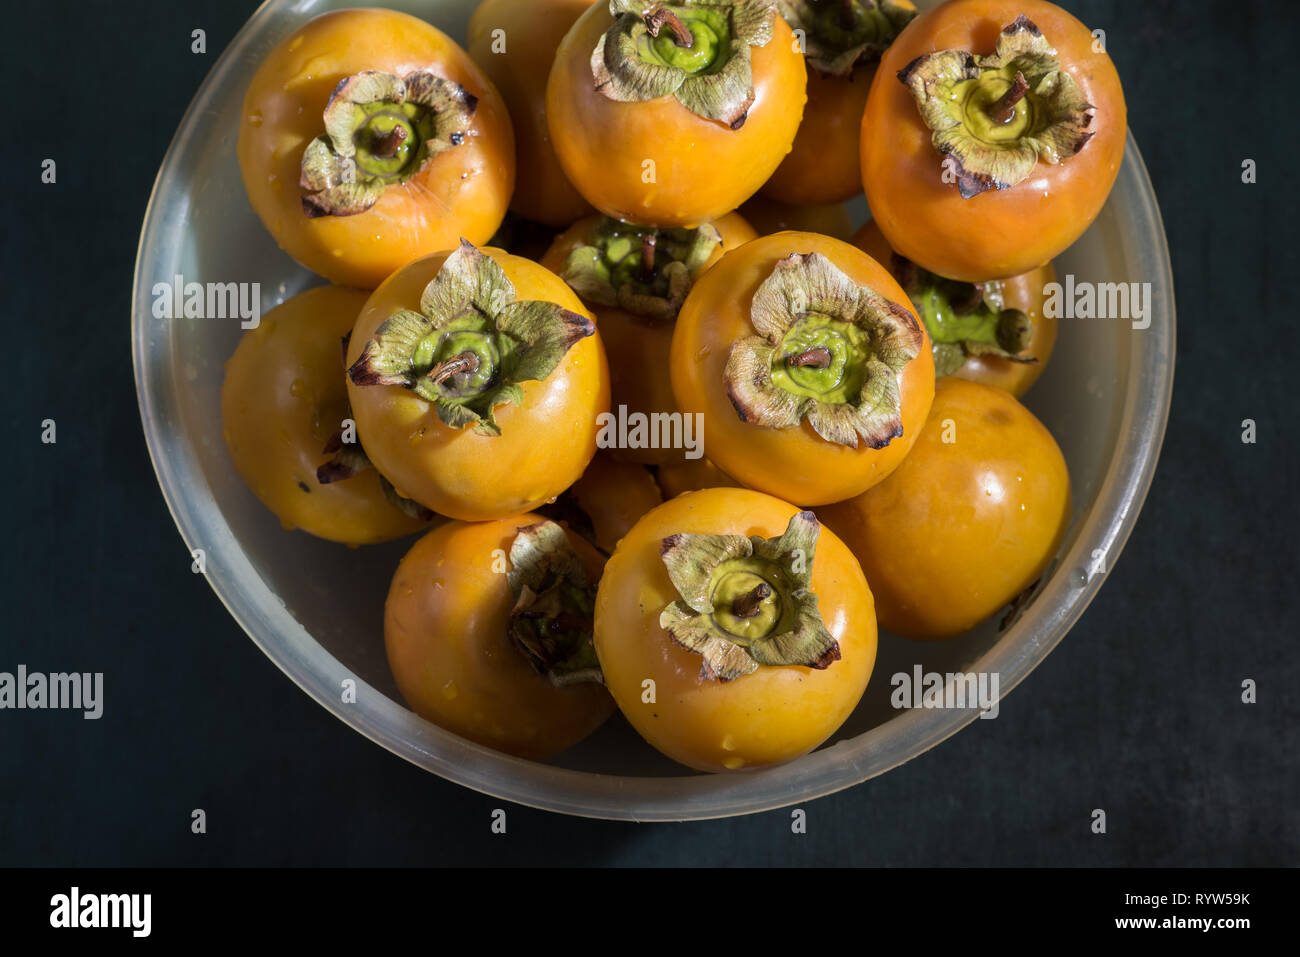 Washed wet persimmons in a bowl on the table, close up. Stock Photo